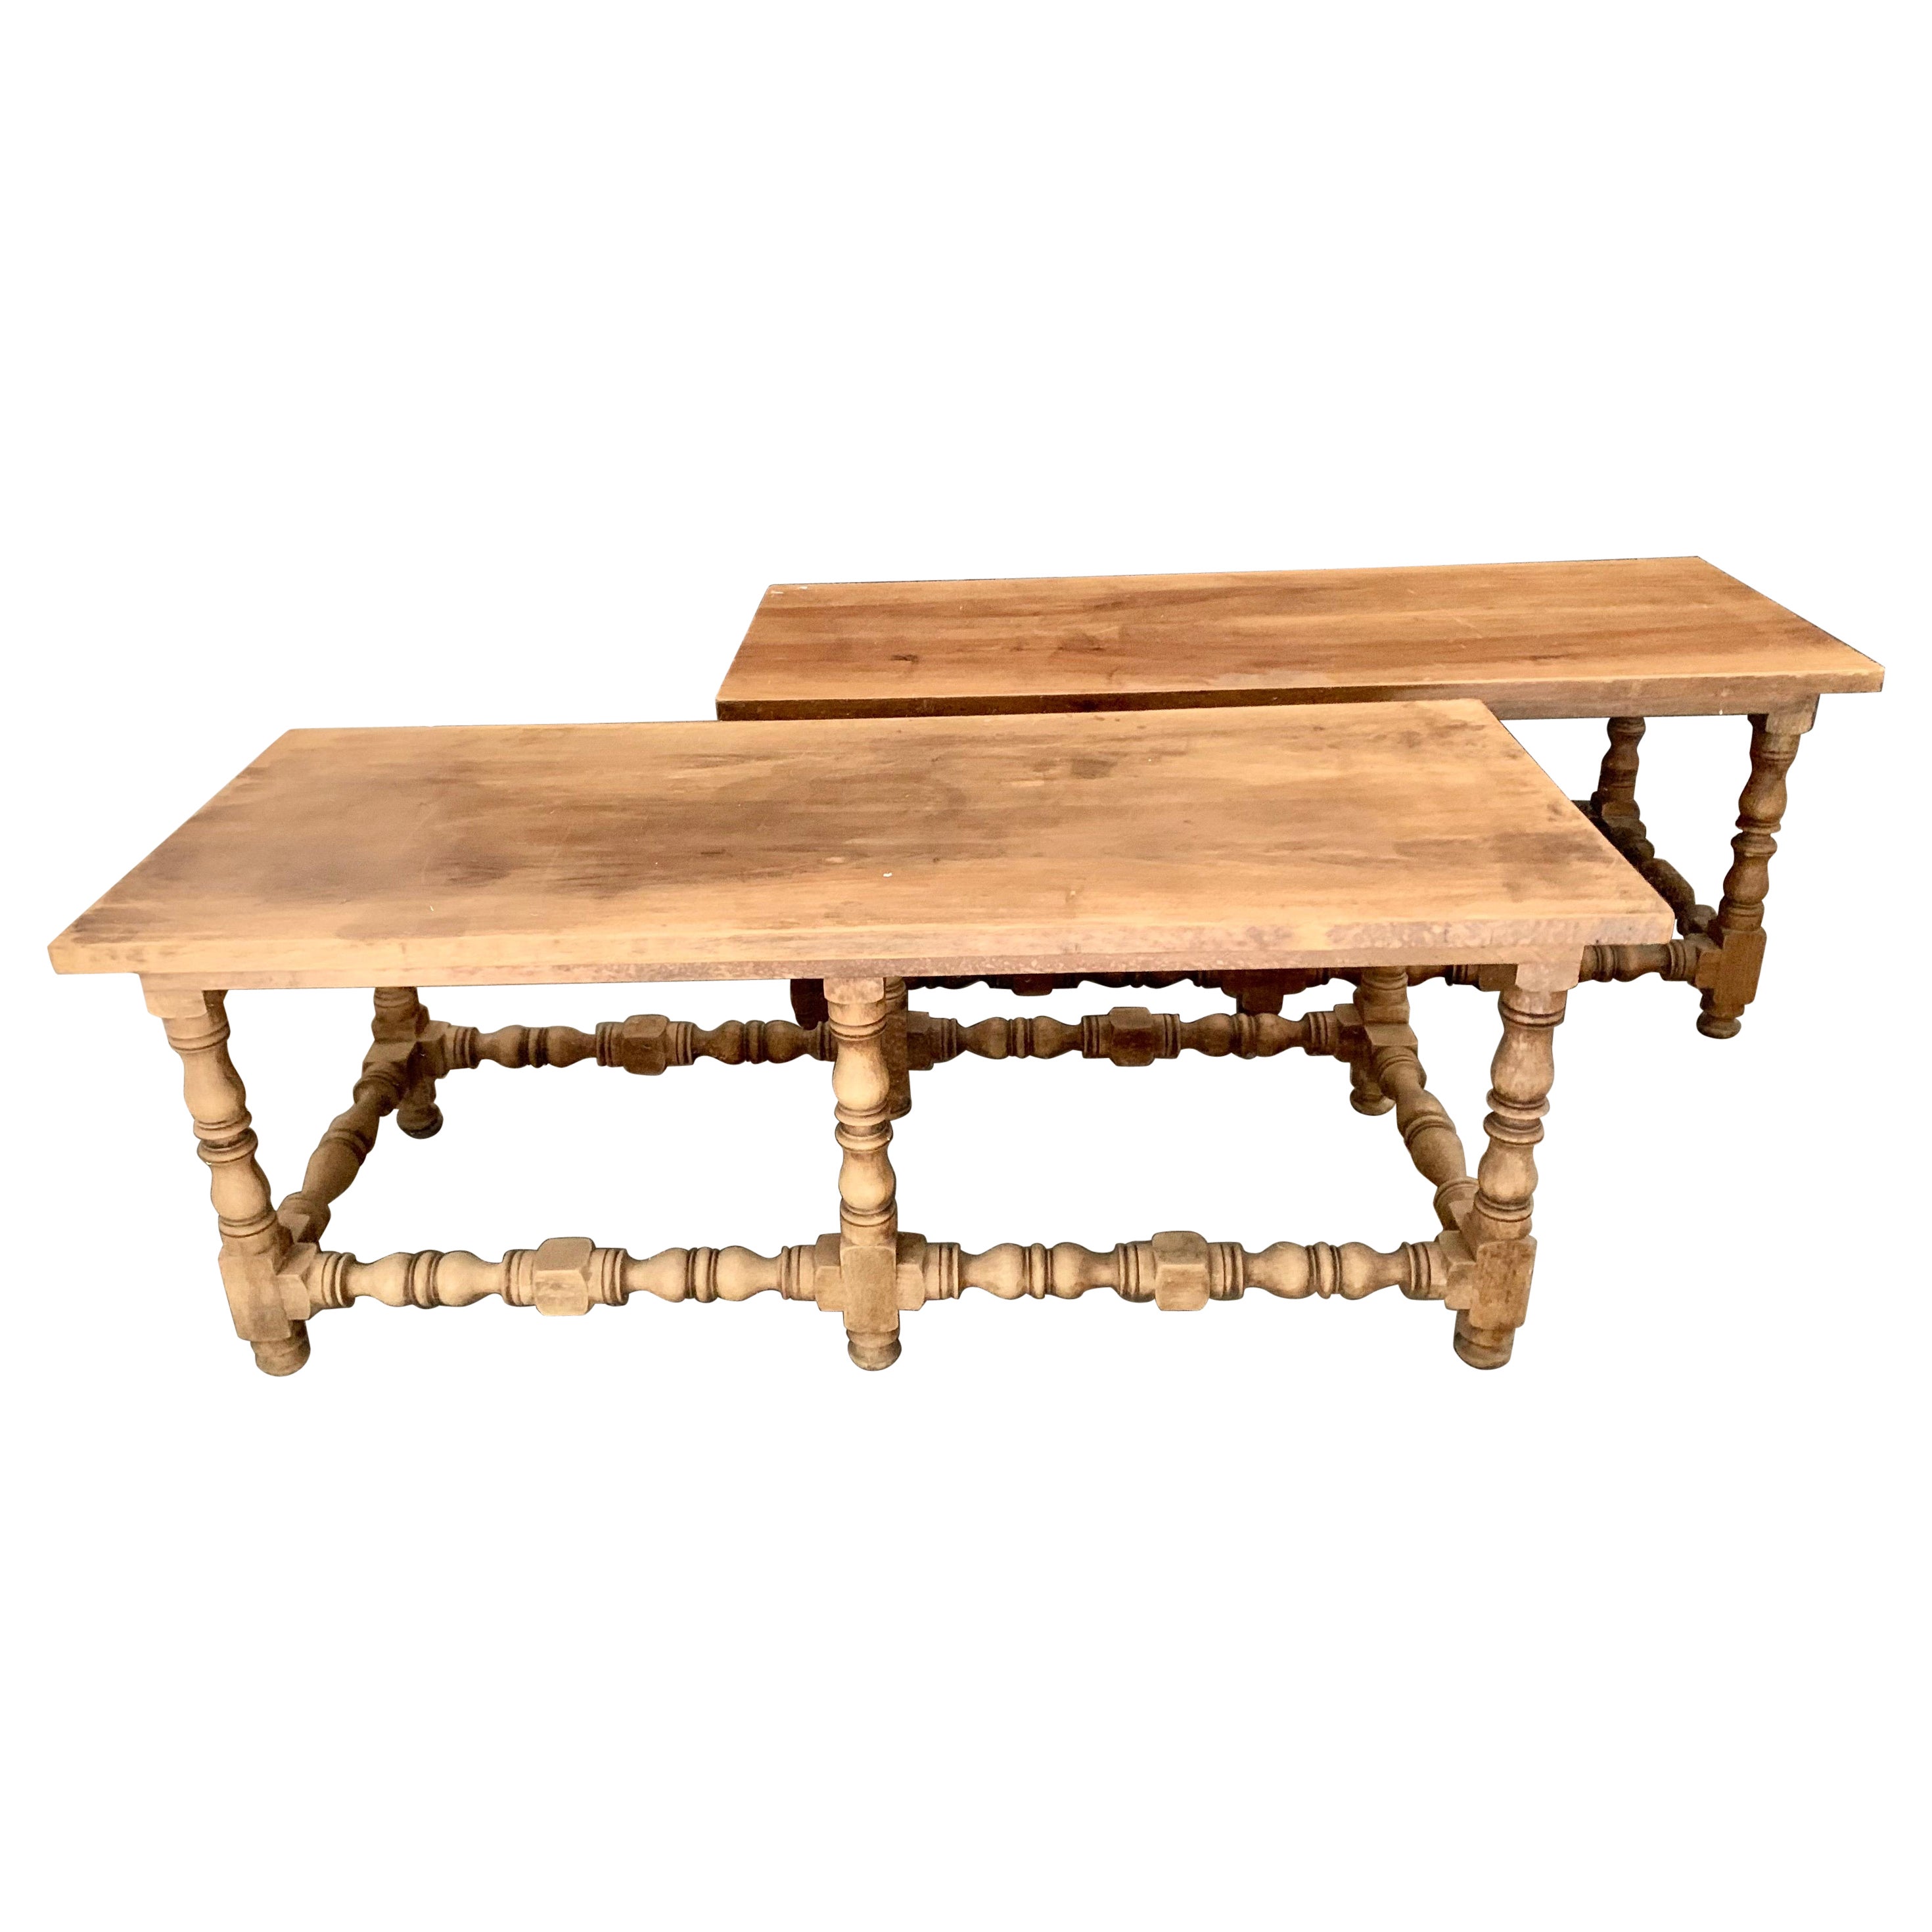 Pair of Baroque Style Spanish Benches or Low Table in Beech Wood